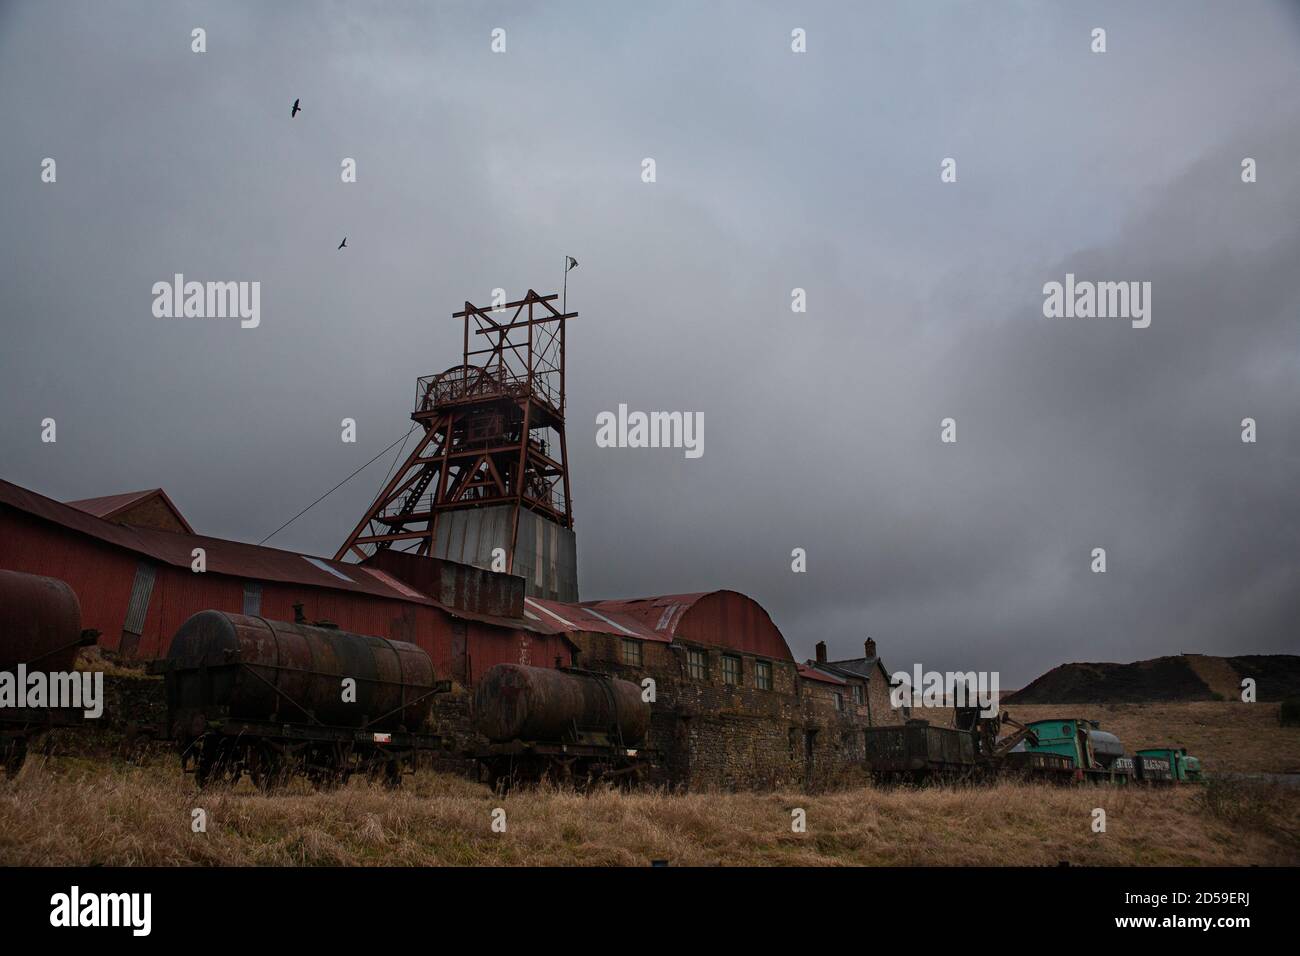 Winding gear at the Big Pit former coal mine at the UNESCO World Heritage Site, Blaenavon Industrial Landscape, South Wales, United Kingdom Stock Photo